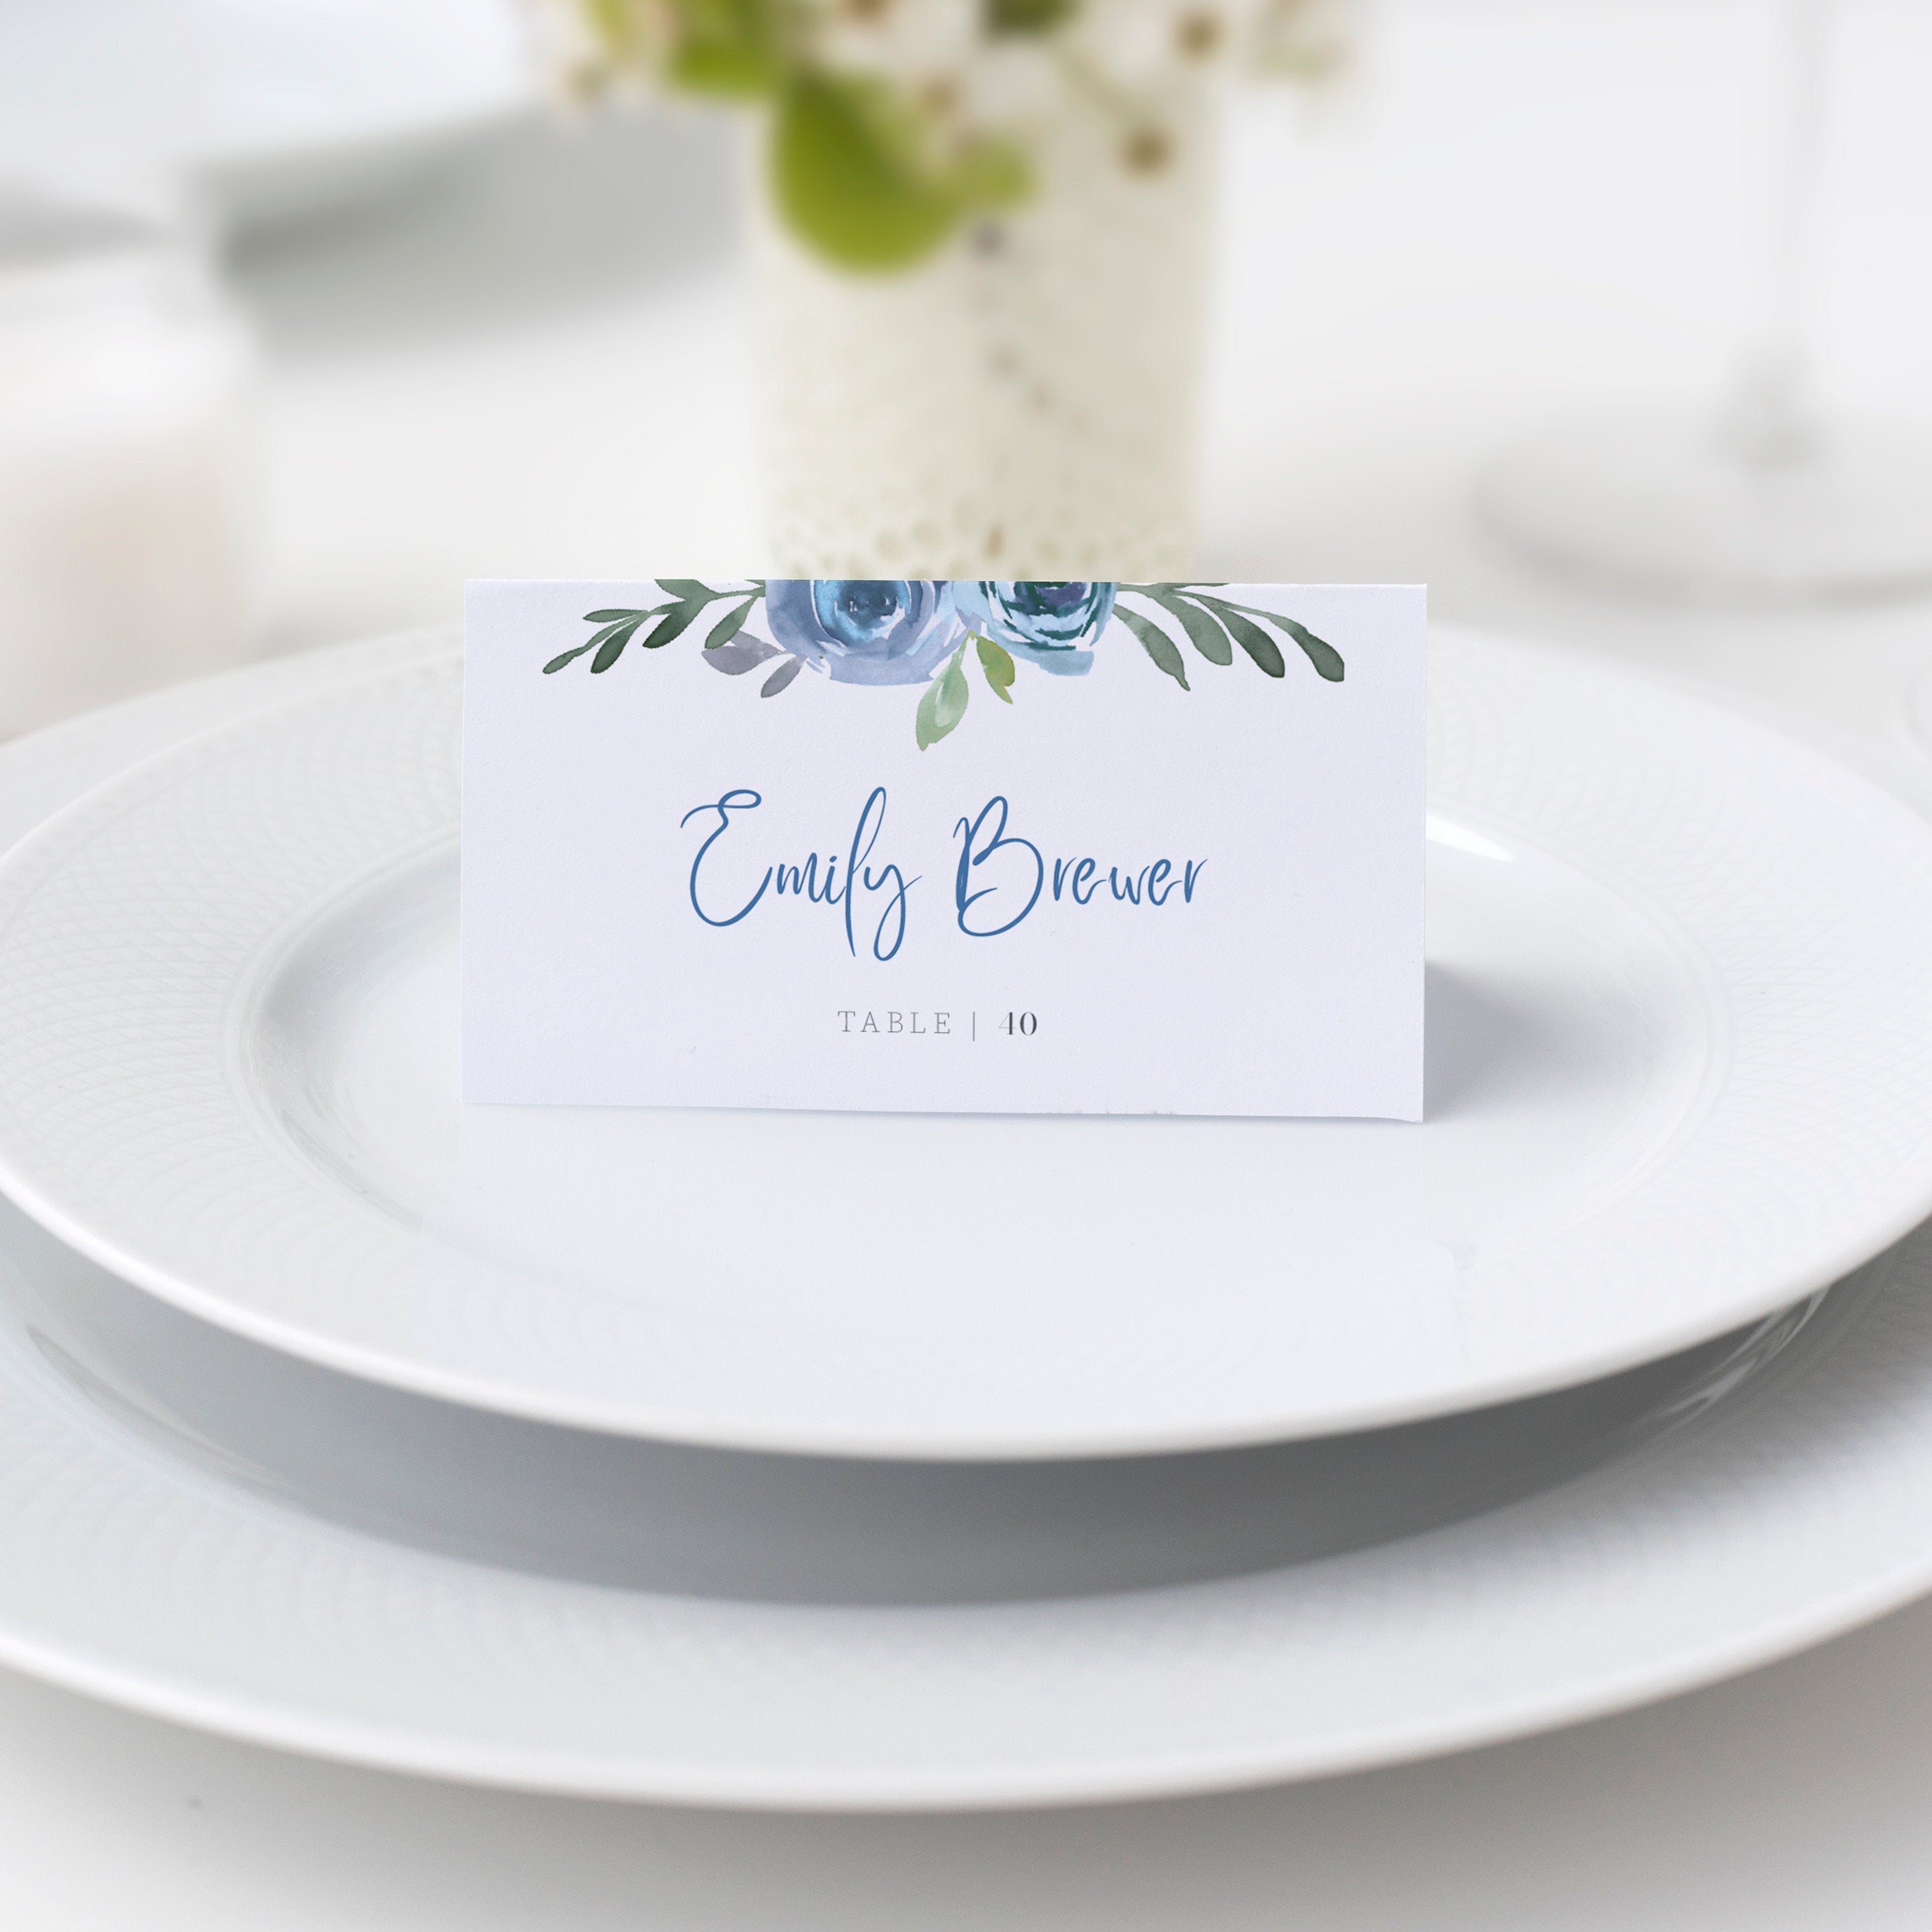 Blue Floral Wedding Place Card Template, Personalized Wedding Name Cards, Printable Place Cards, DIGITAL DOWNLOAD - BF100 - @PlumPolkaDot 